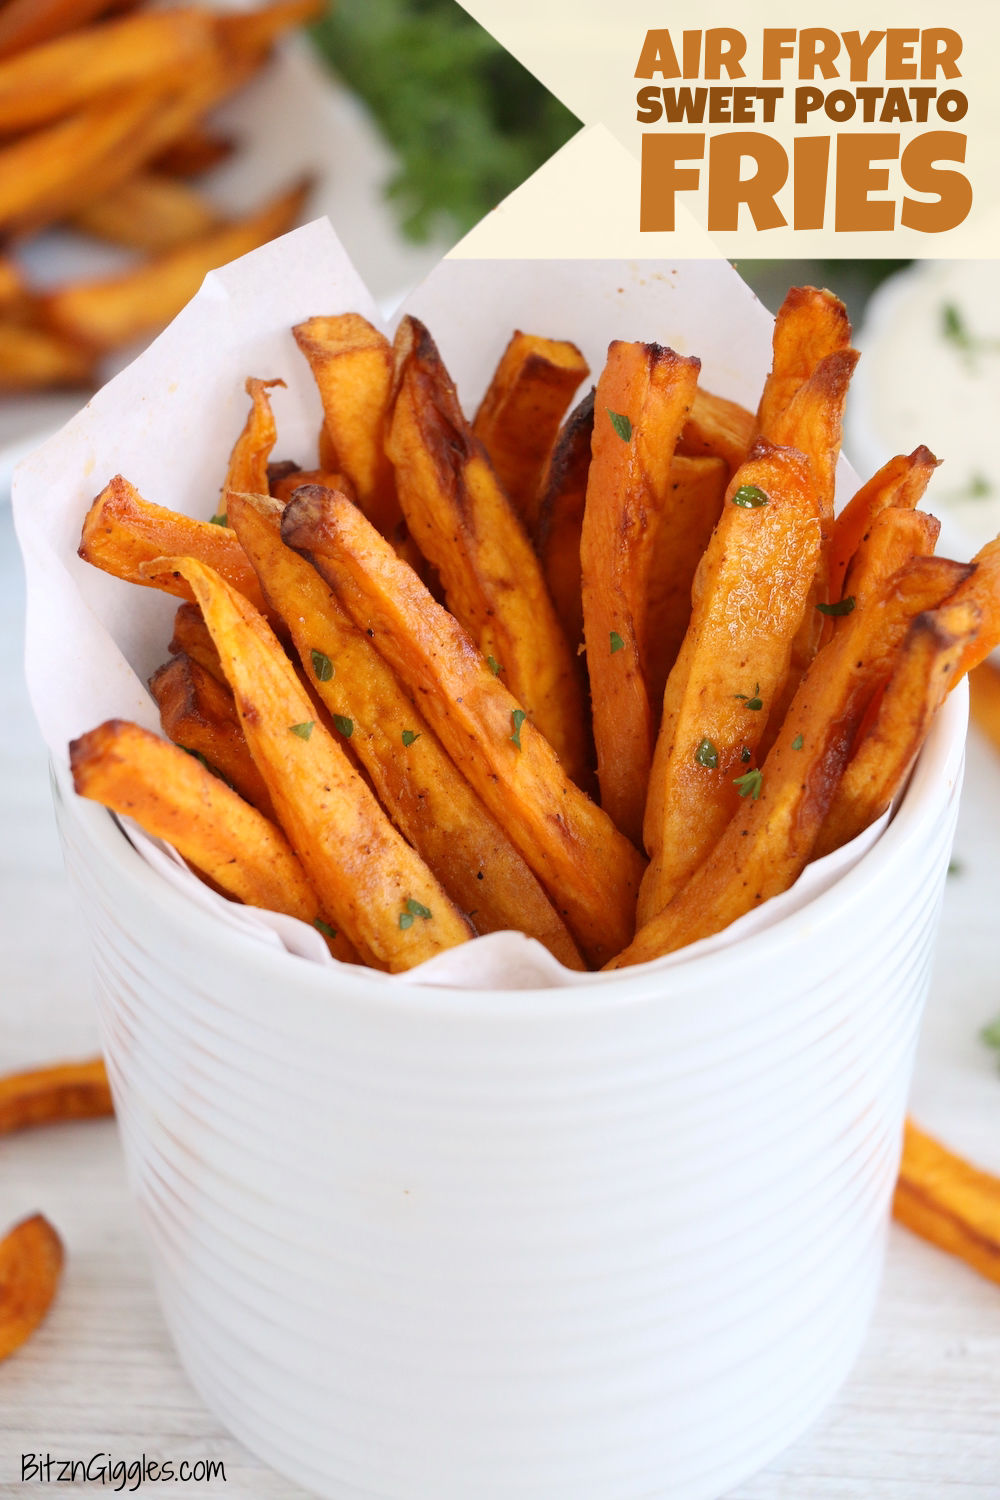 Simple Air Fryer Sweet Potato Fries Recipe - A Pinch of Healthy